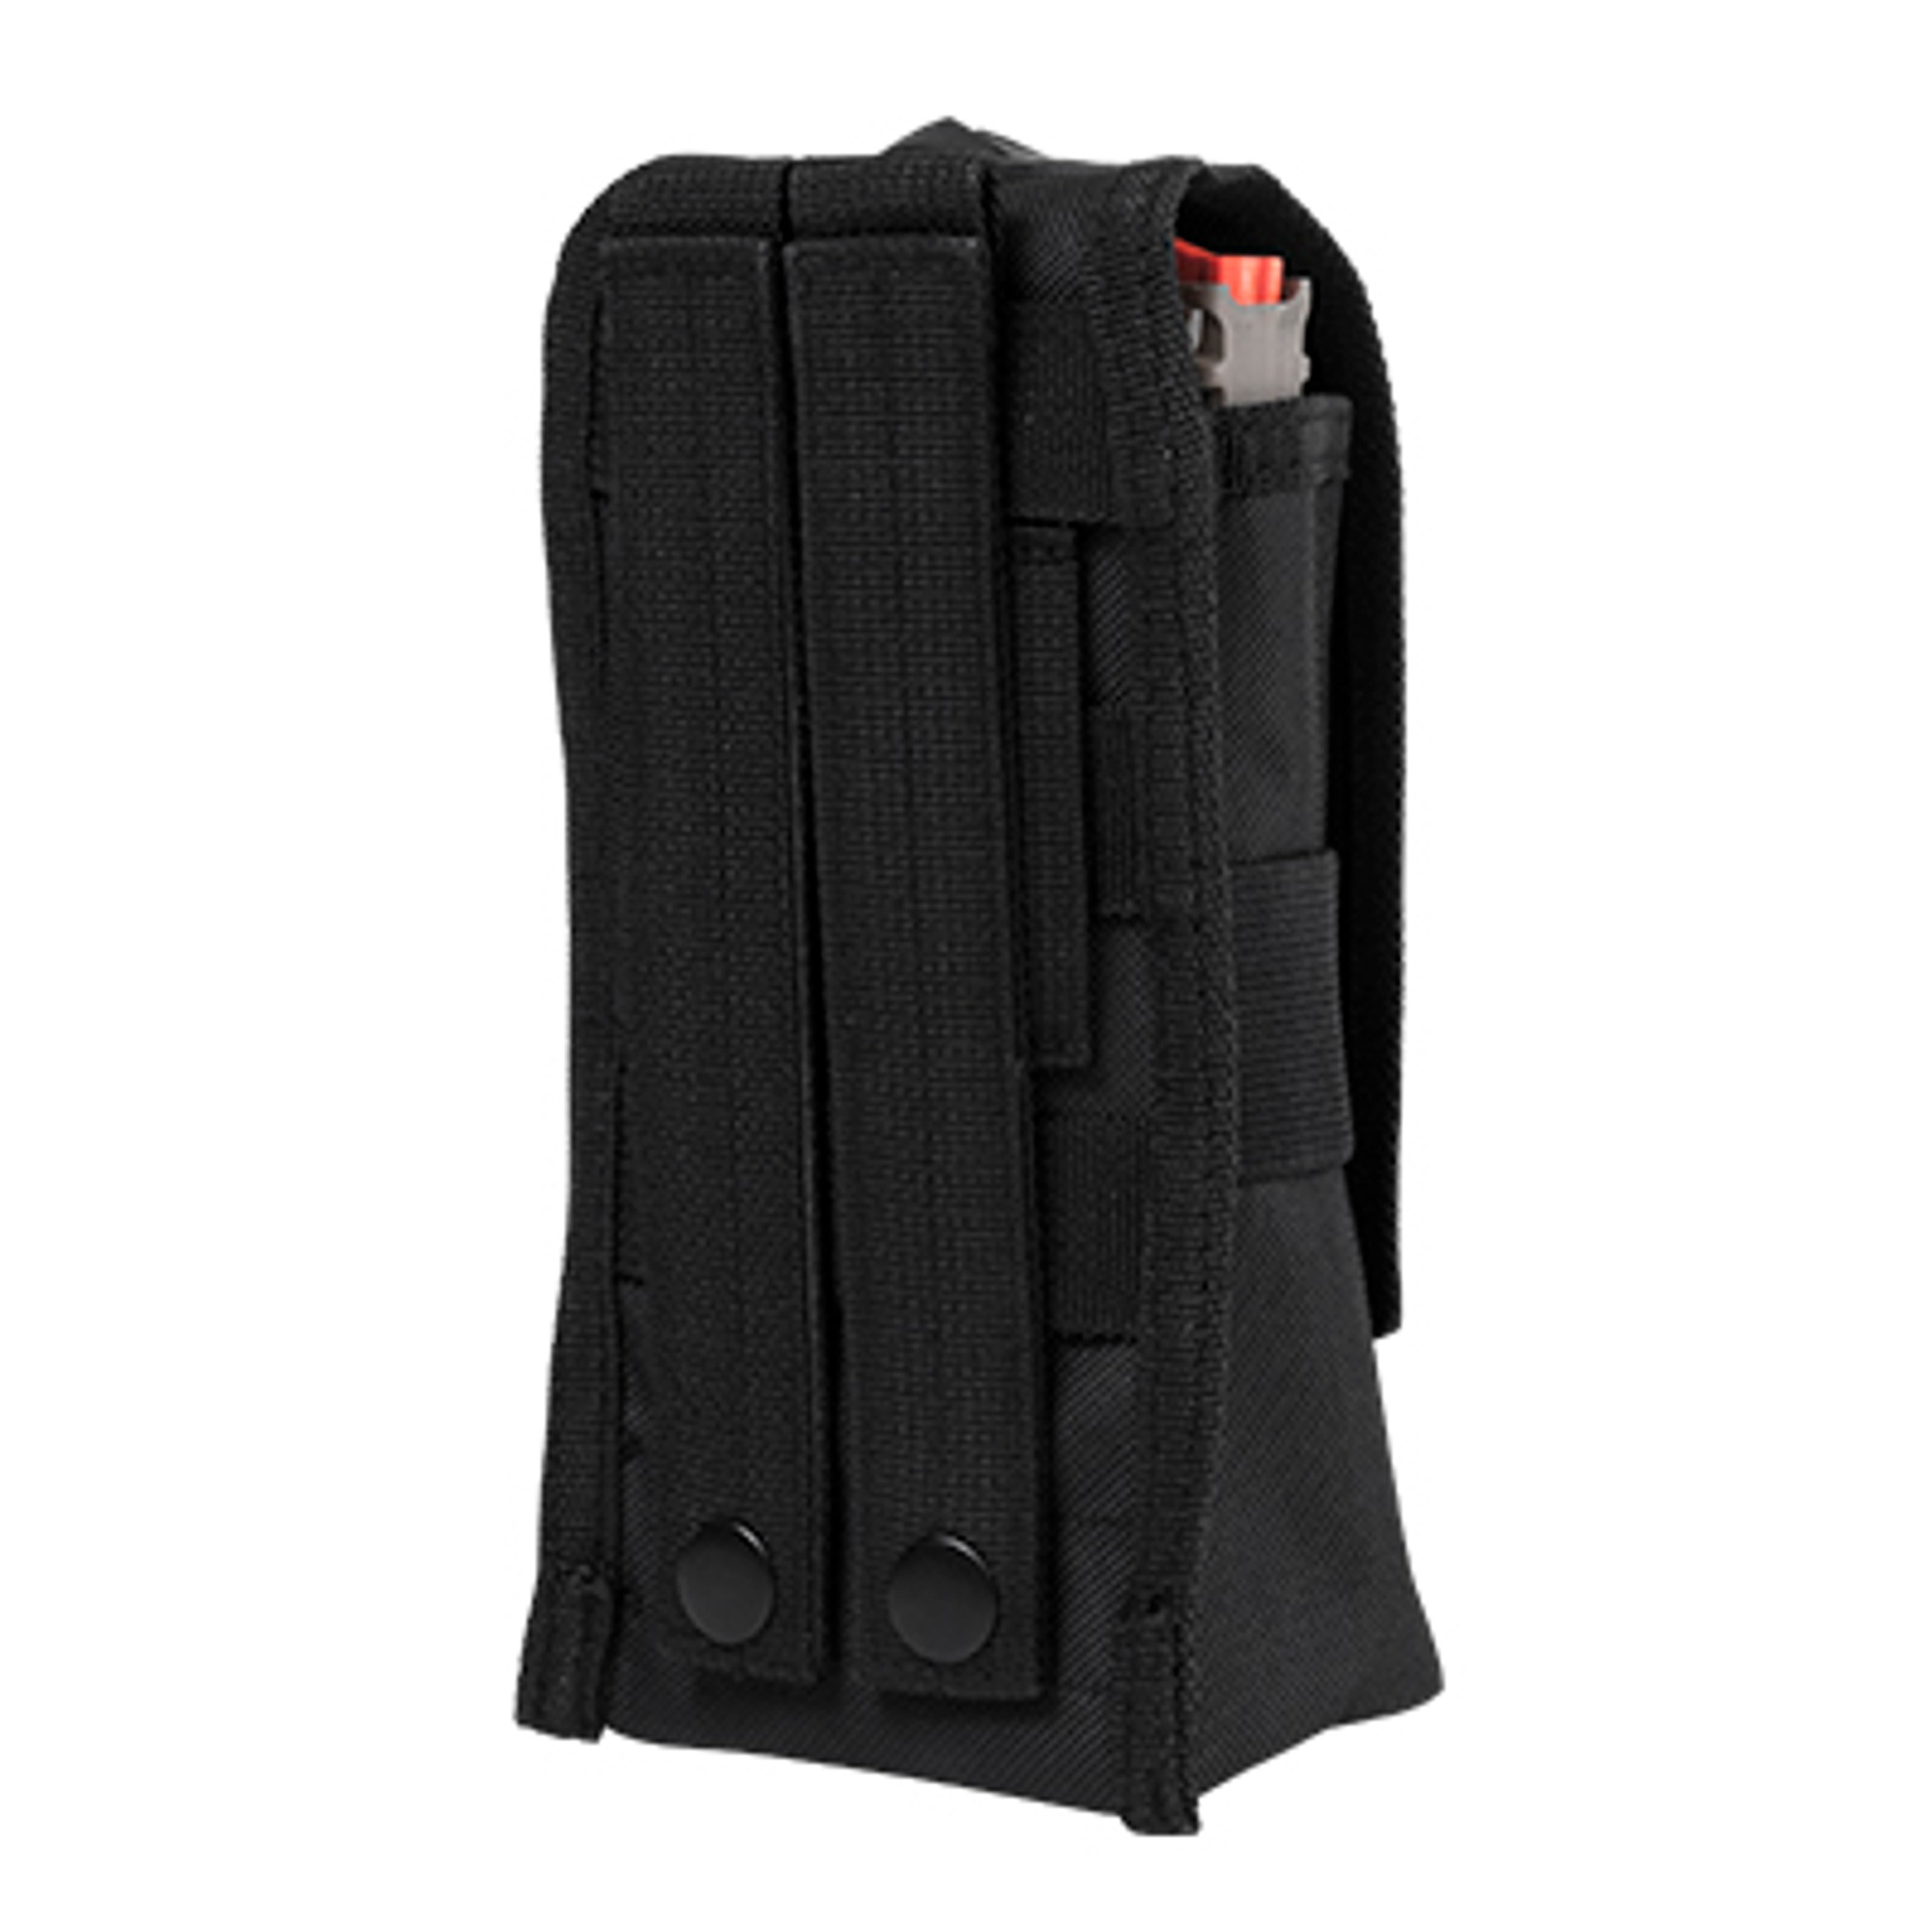 VISM 2 AR/AK Mags or Radio Pouch